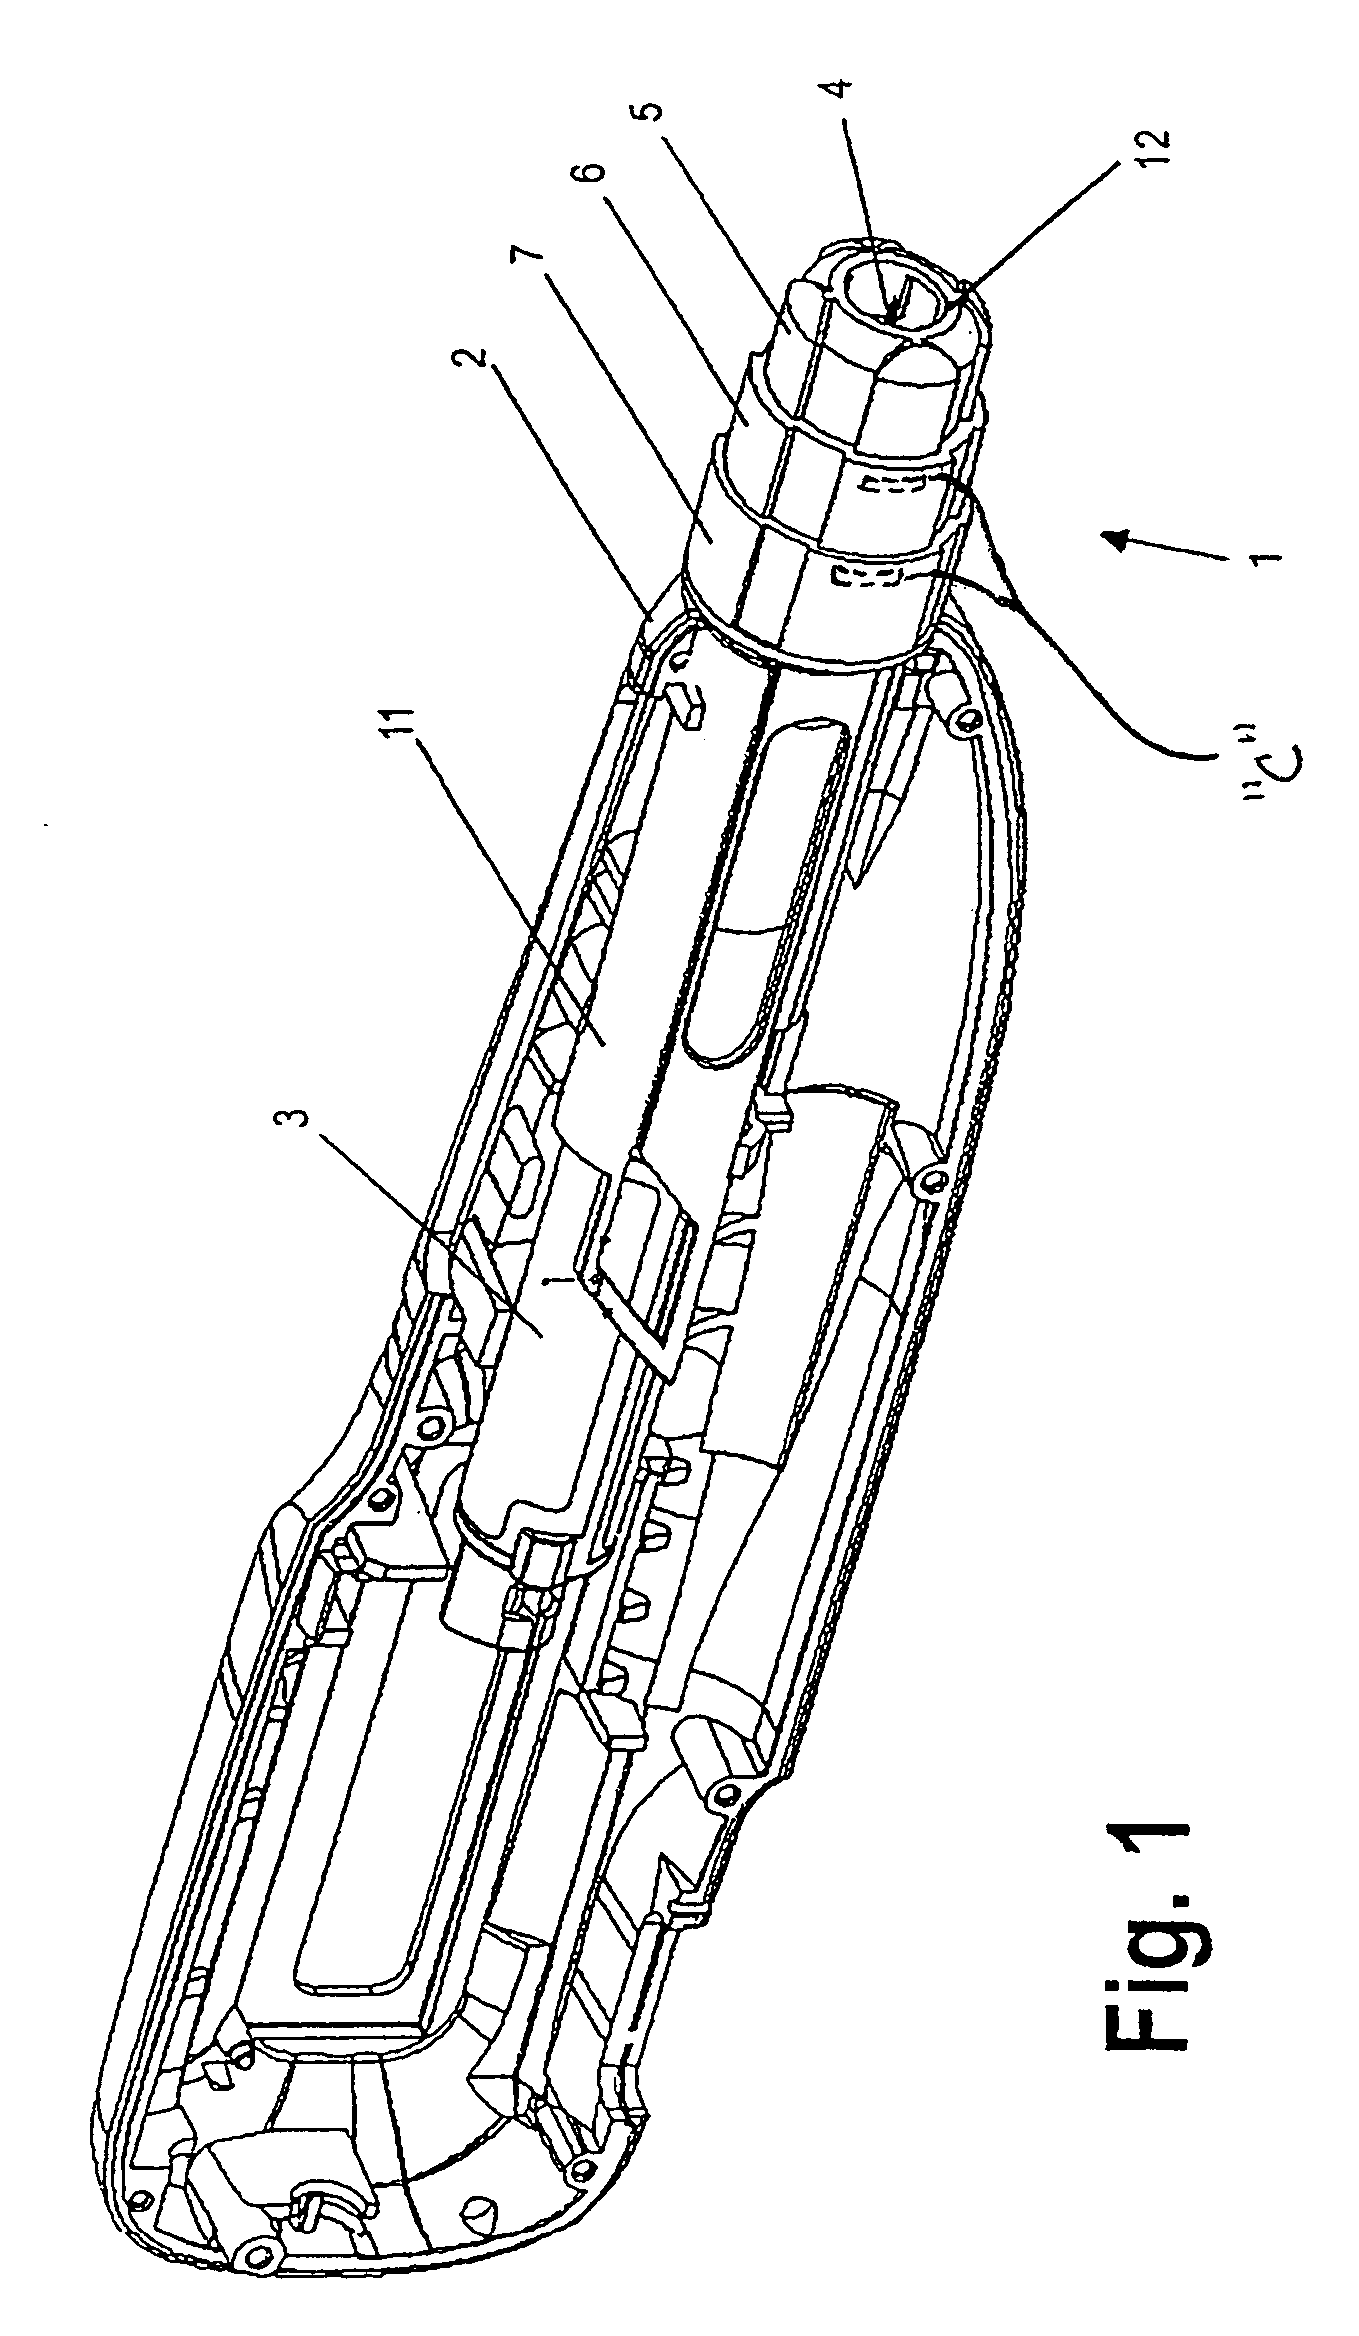 Variable-length needle covering device of an injection device